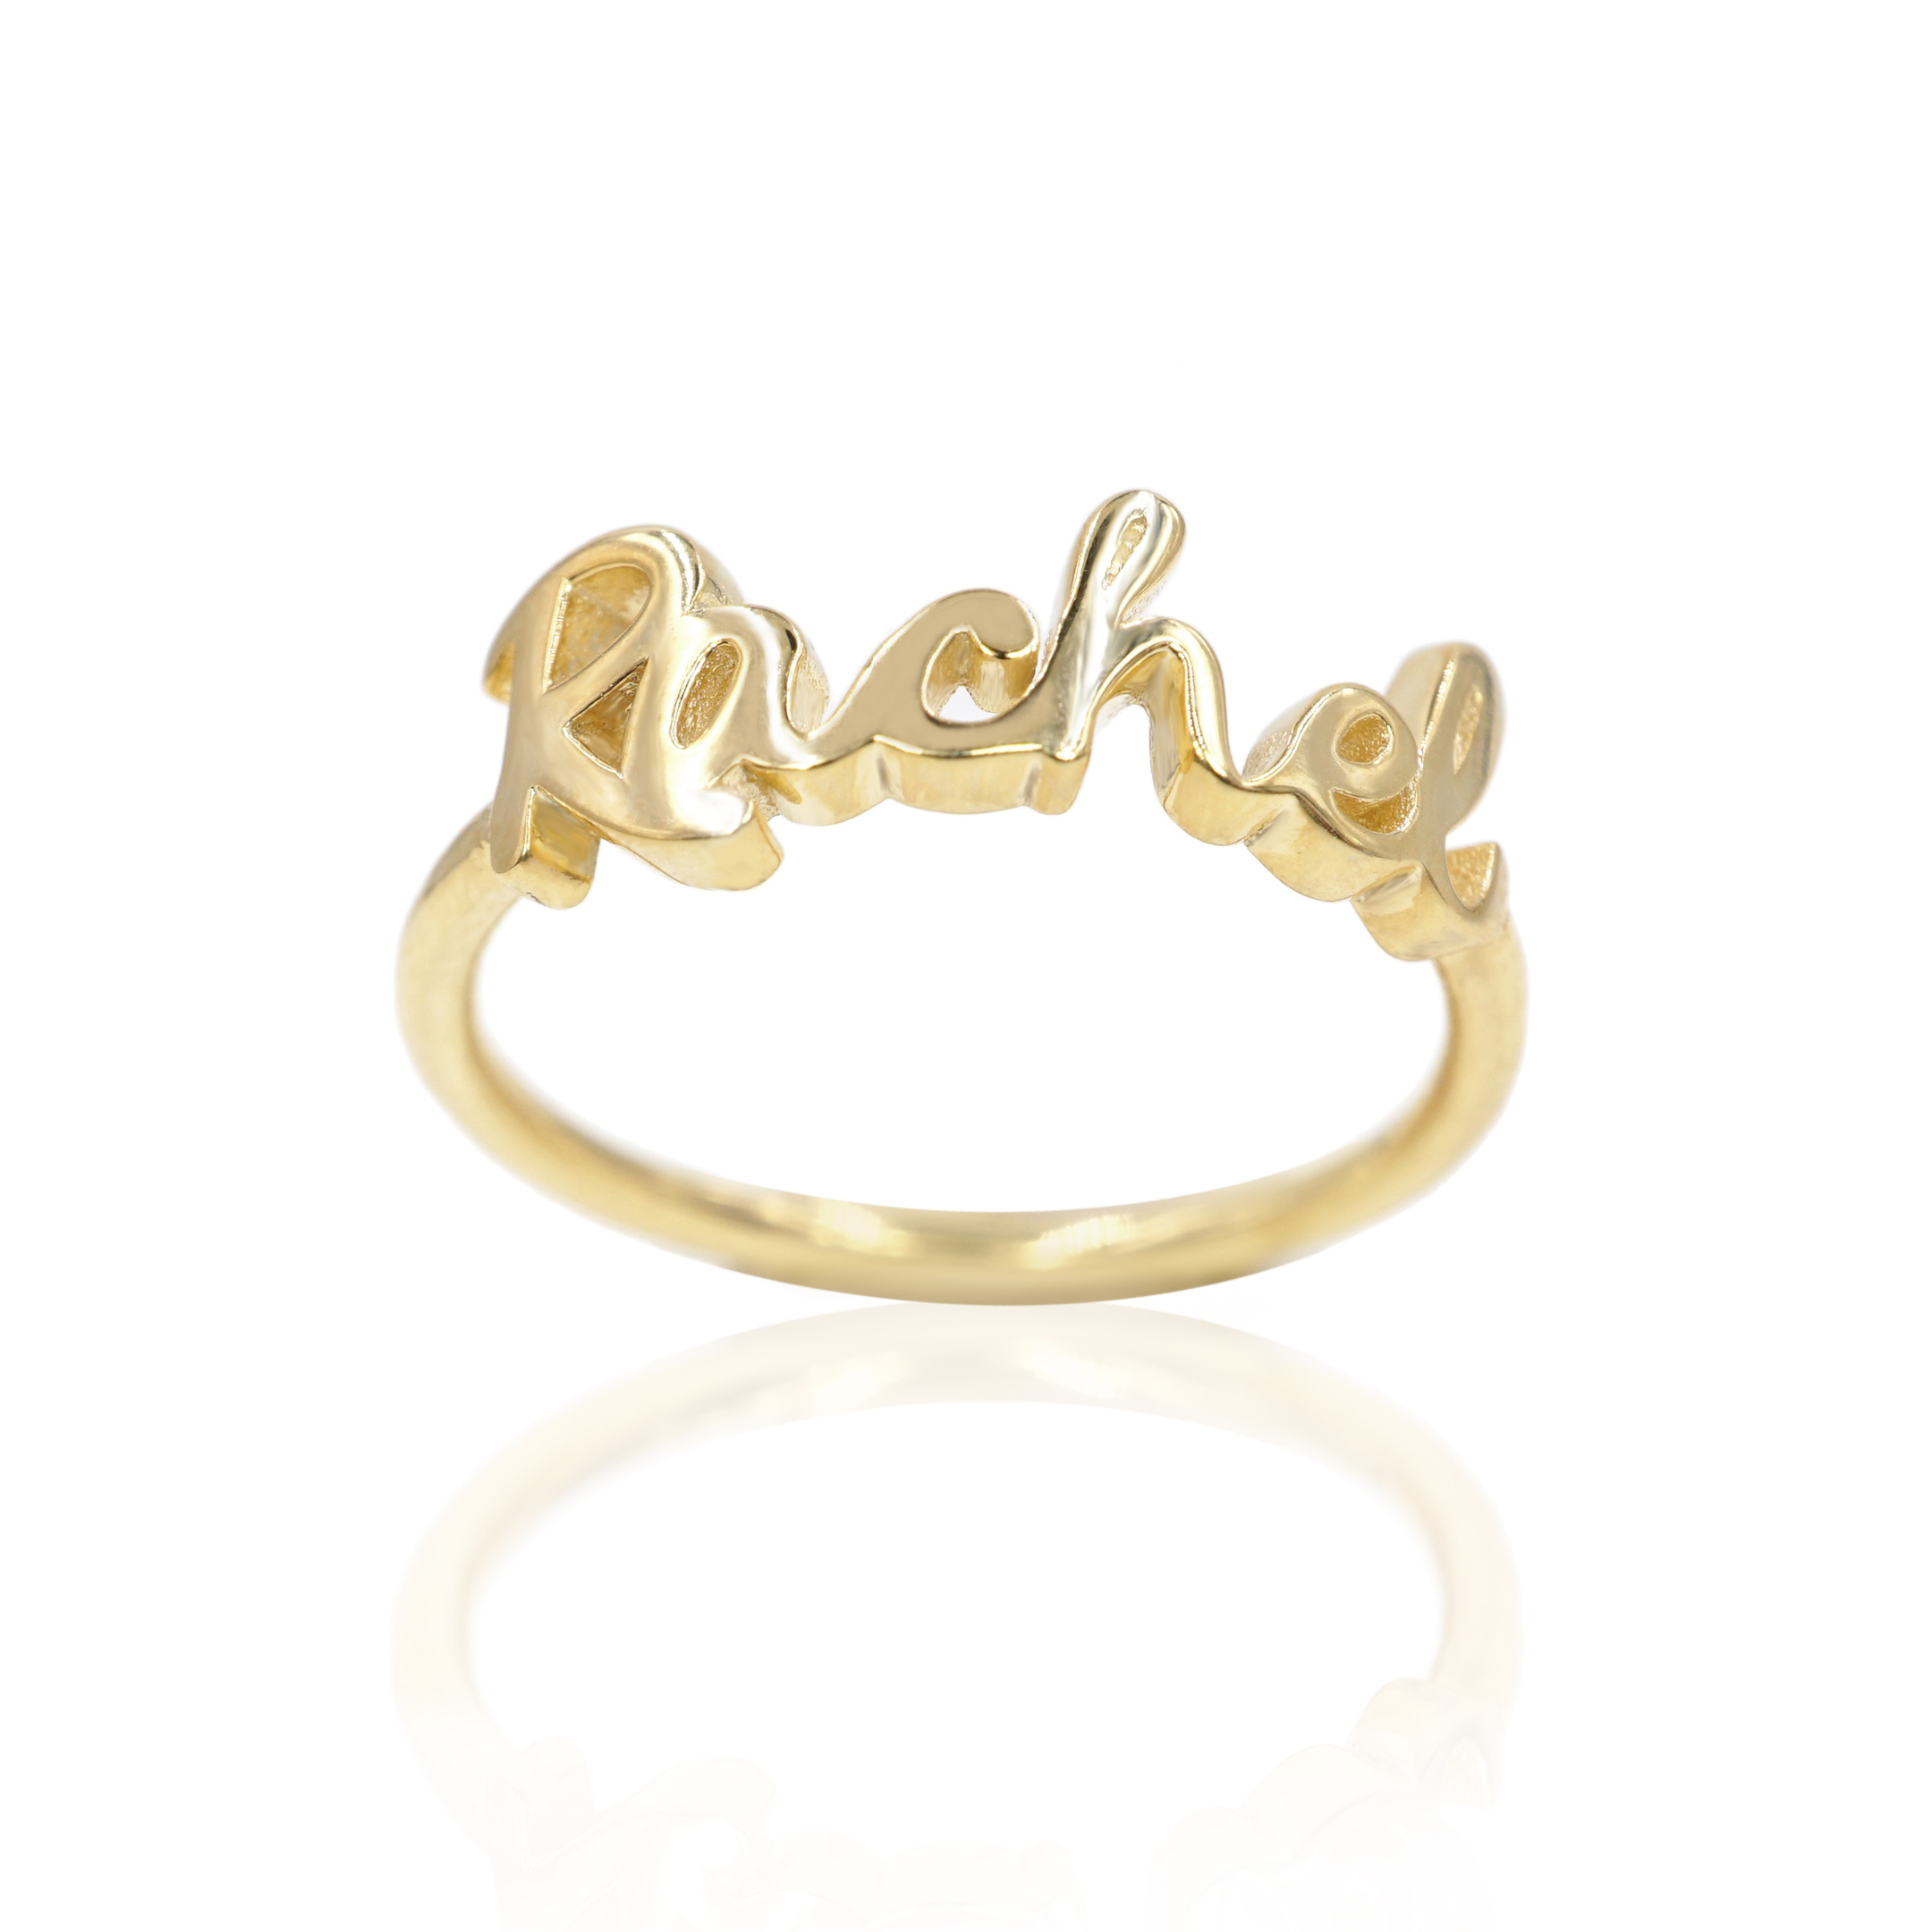 Couple Name Ring - Personalised Ring with Two Names | FARUZO